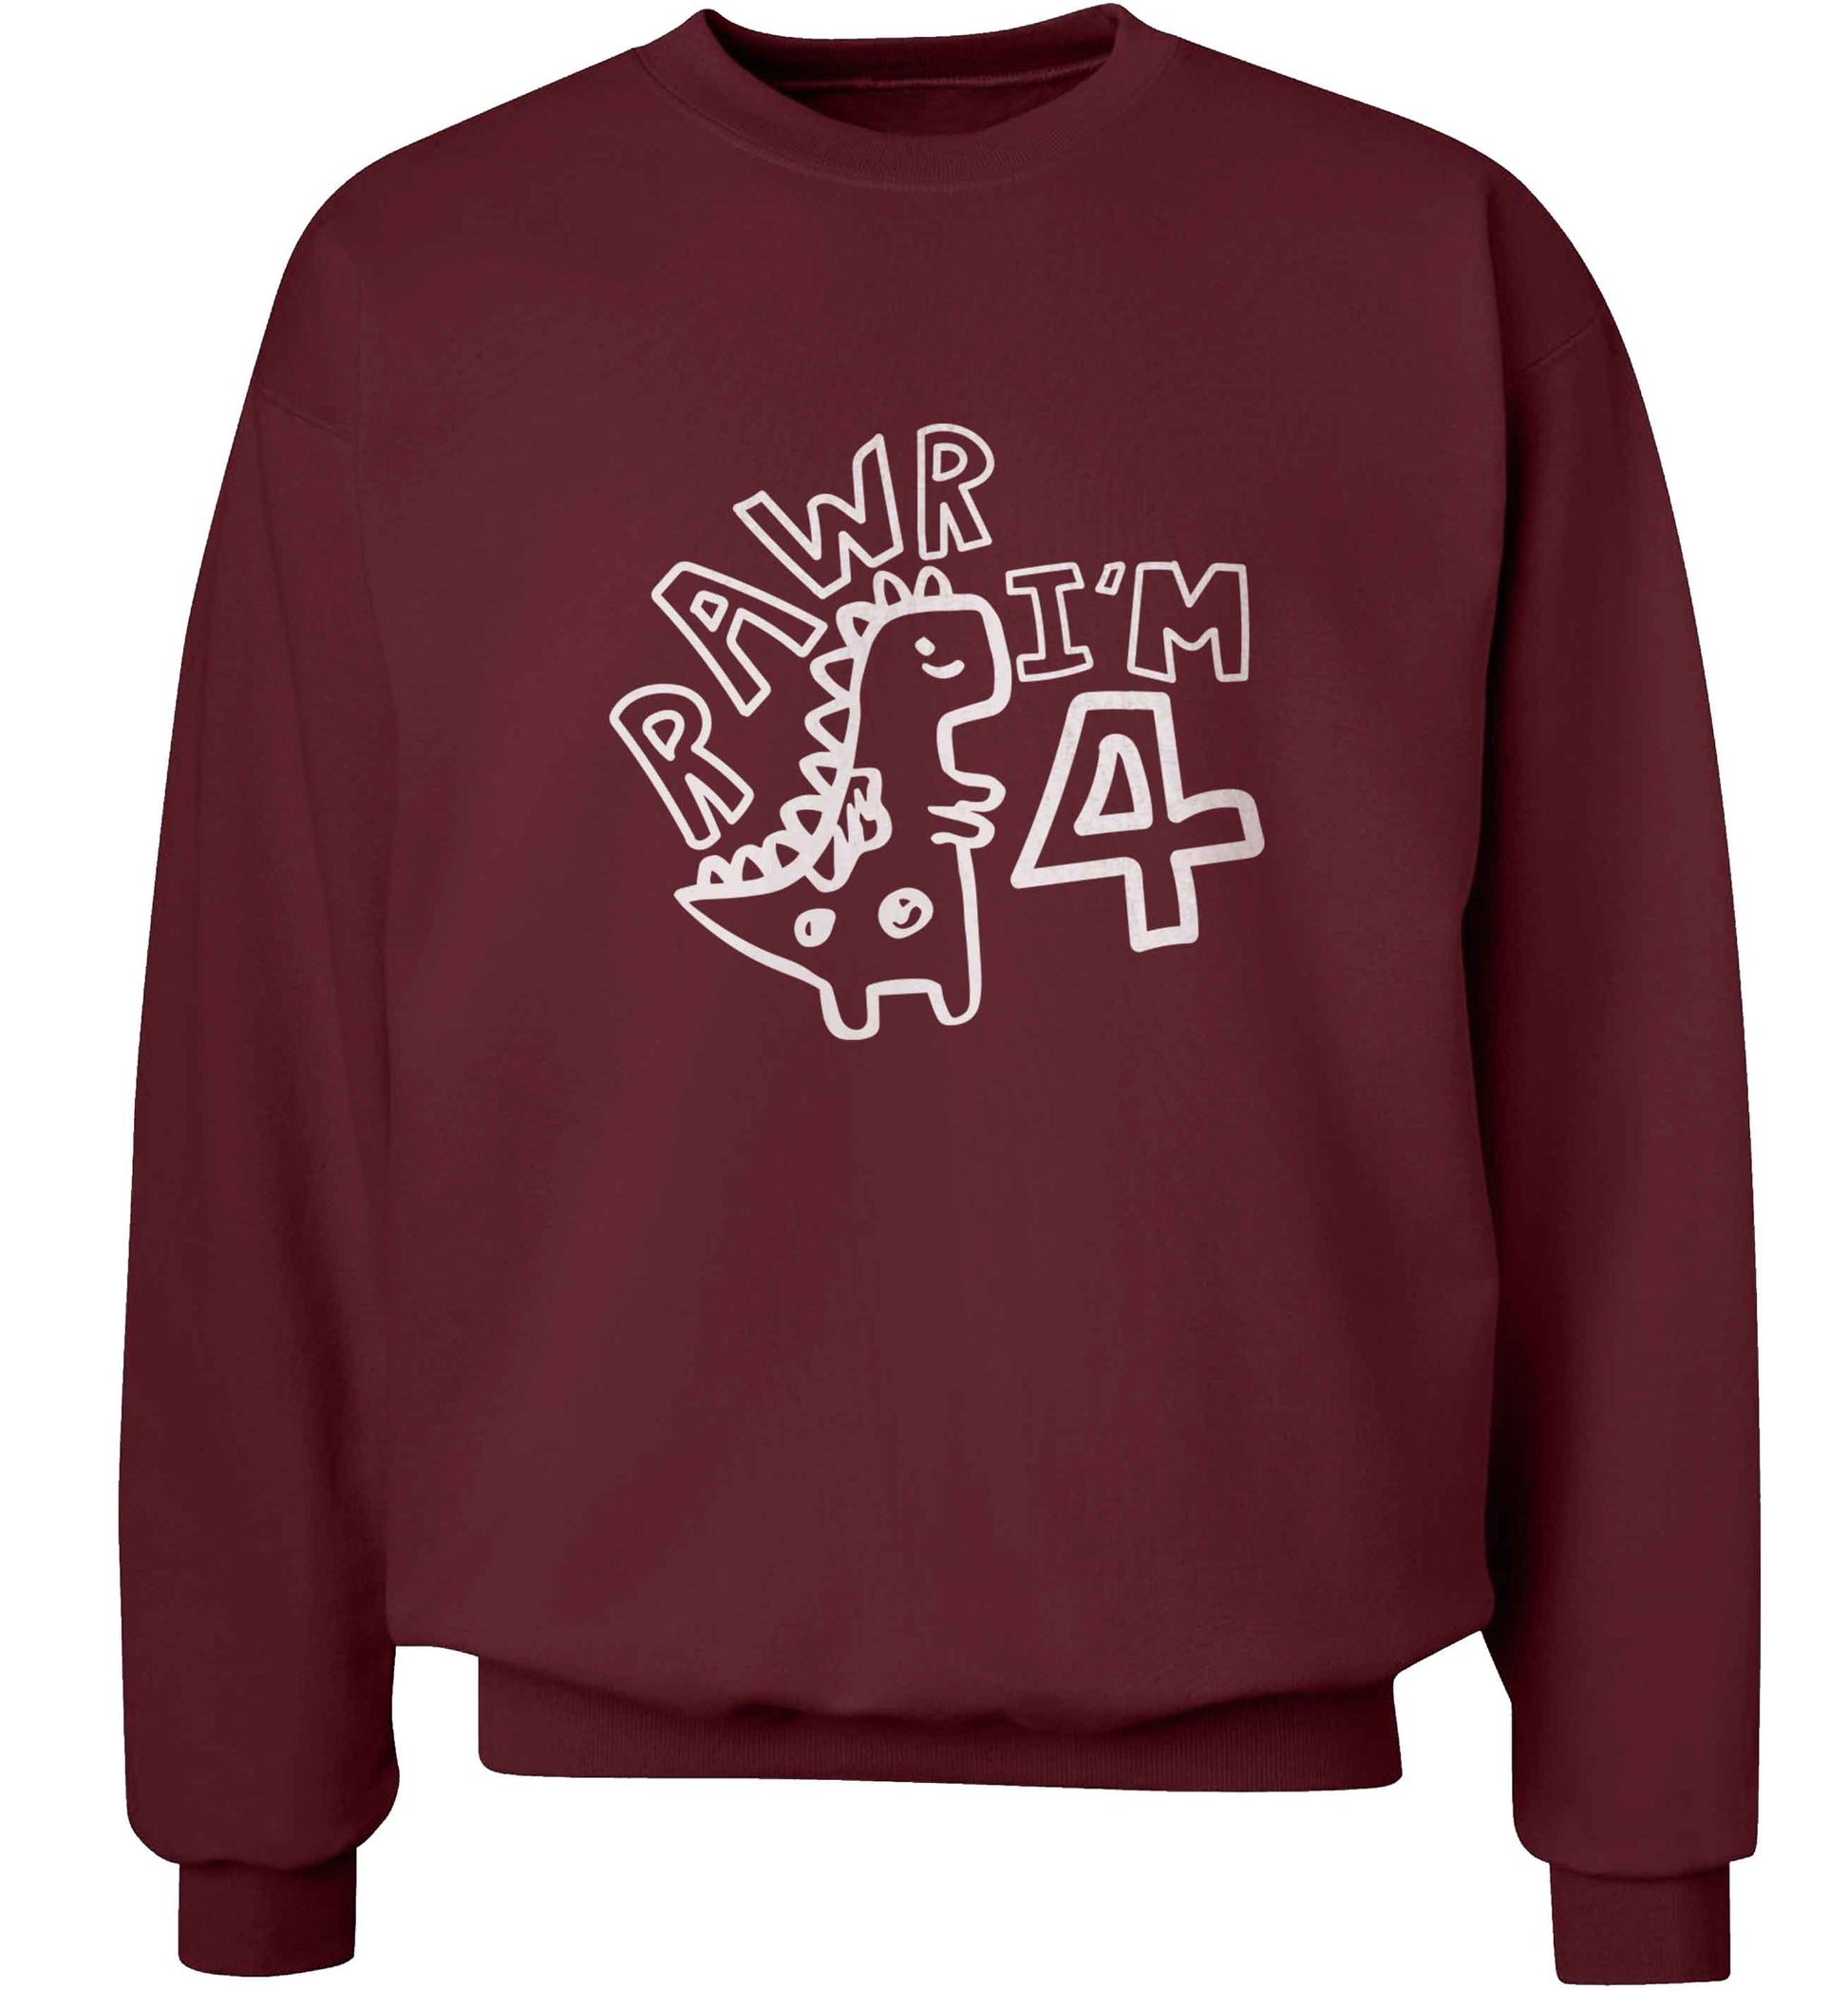 Rawr I'm four - personalise with ANY age! adult's unisex maroon sweater 2XL